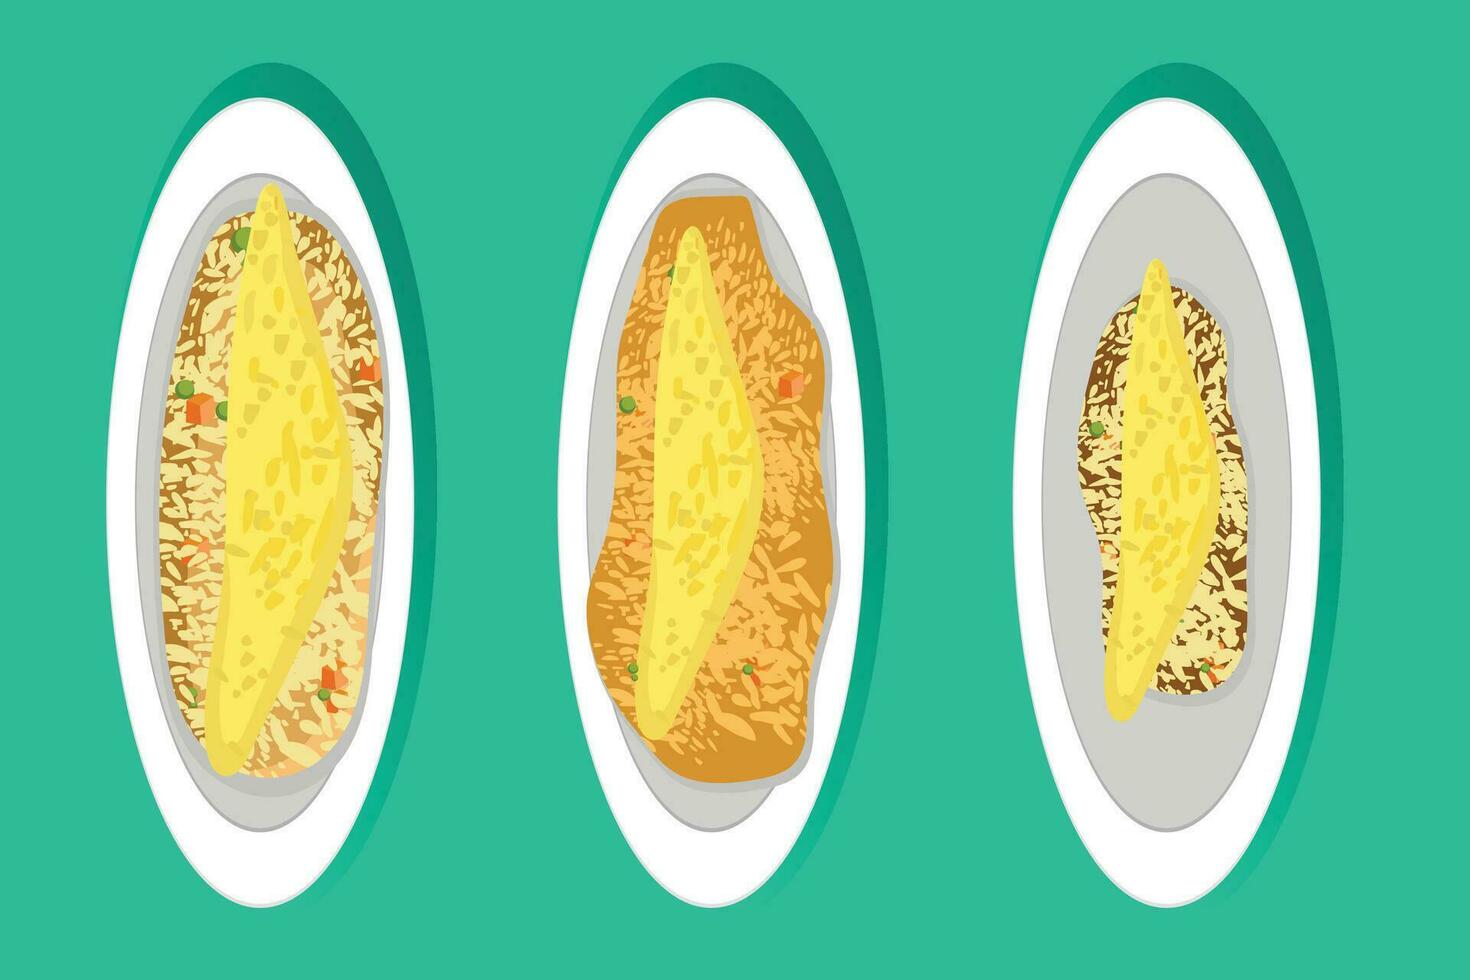 Vector flat illustration of Japanese food, fried rice with scrambled egg topping, omurice. scrambled eggs, melted eggs.